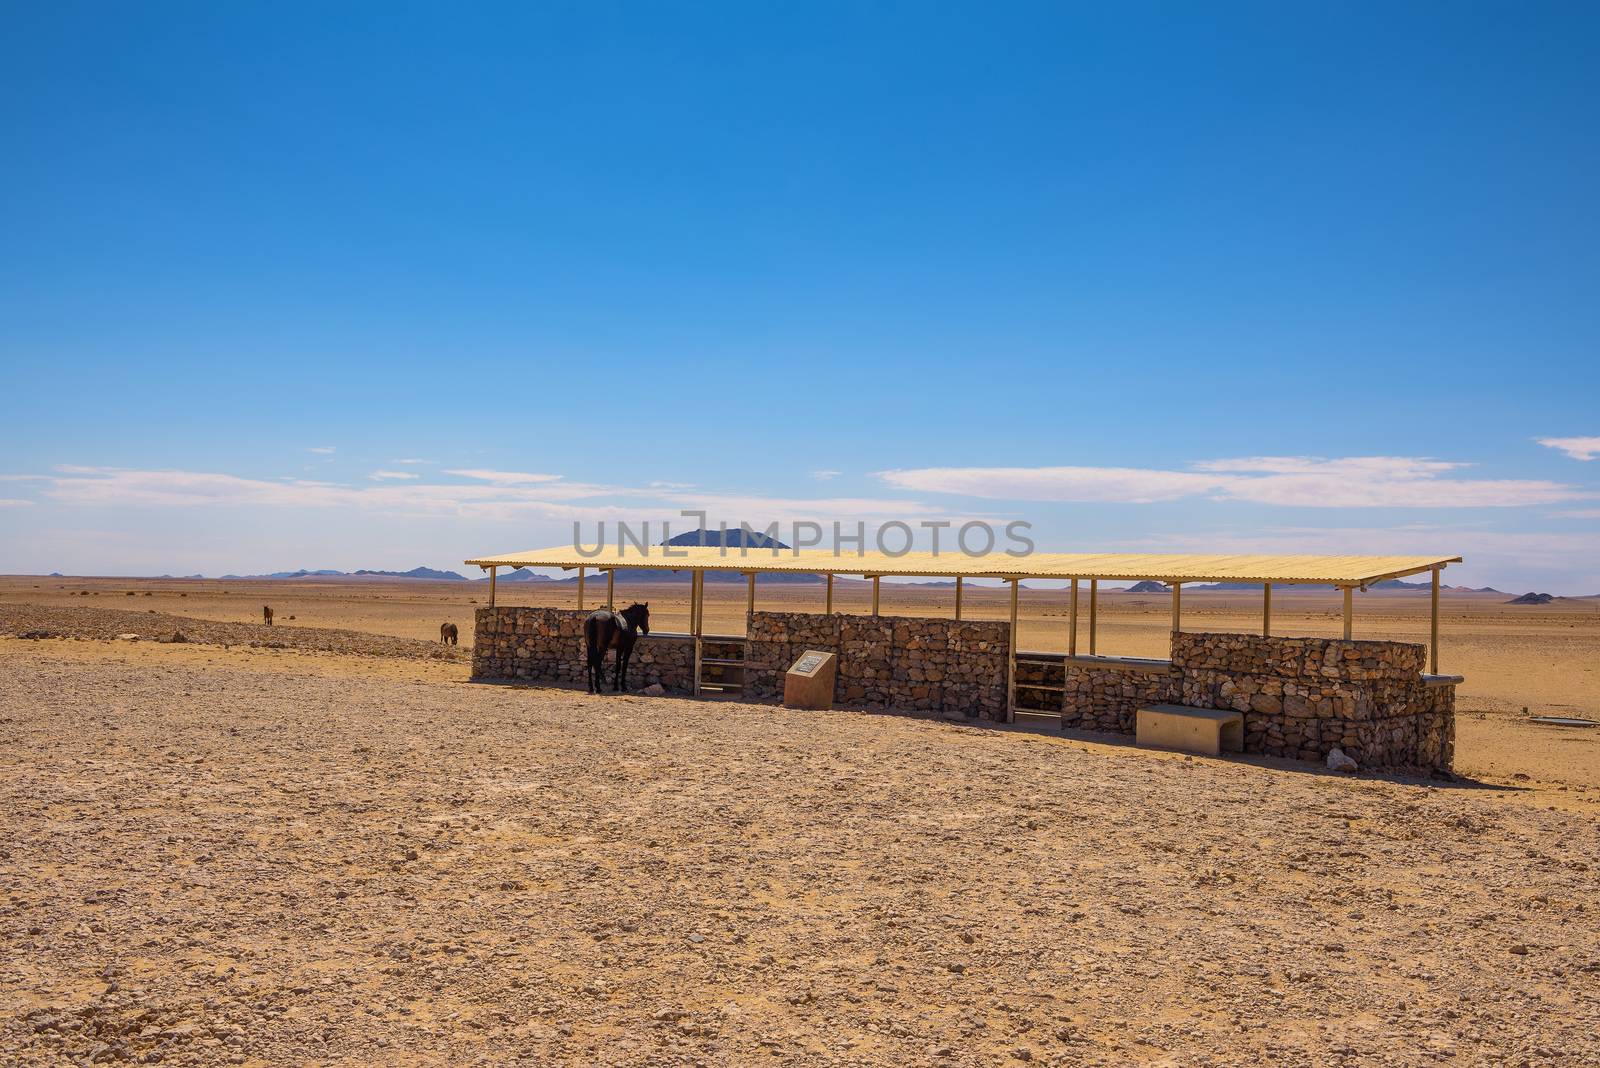 Wild horses of the Namib desert standing at an observation viewpoint near Aus, south Namibia.